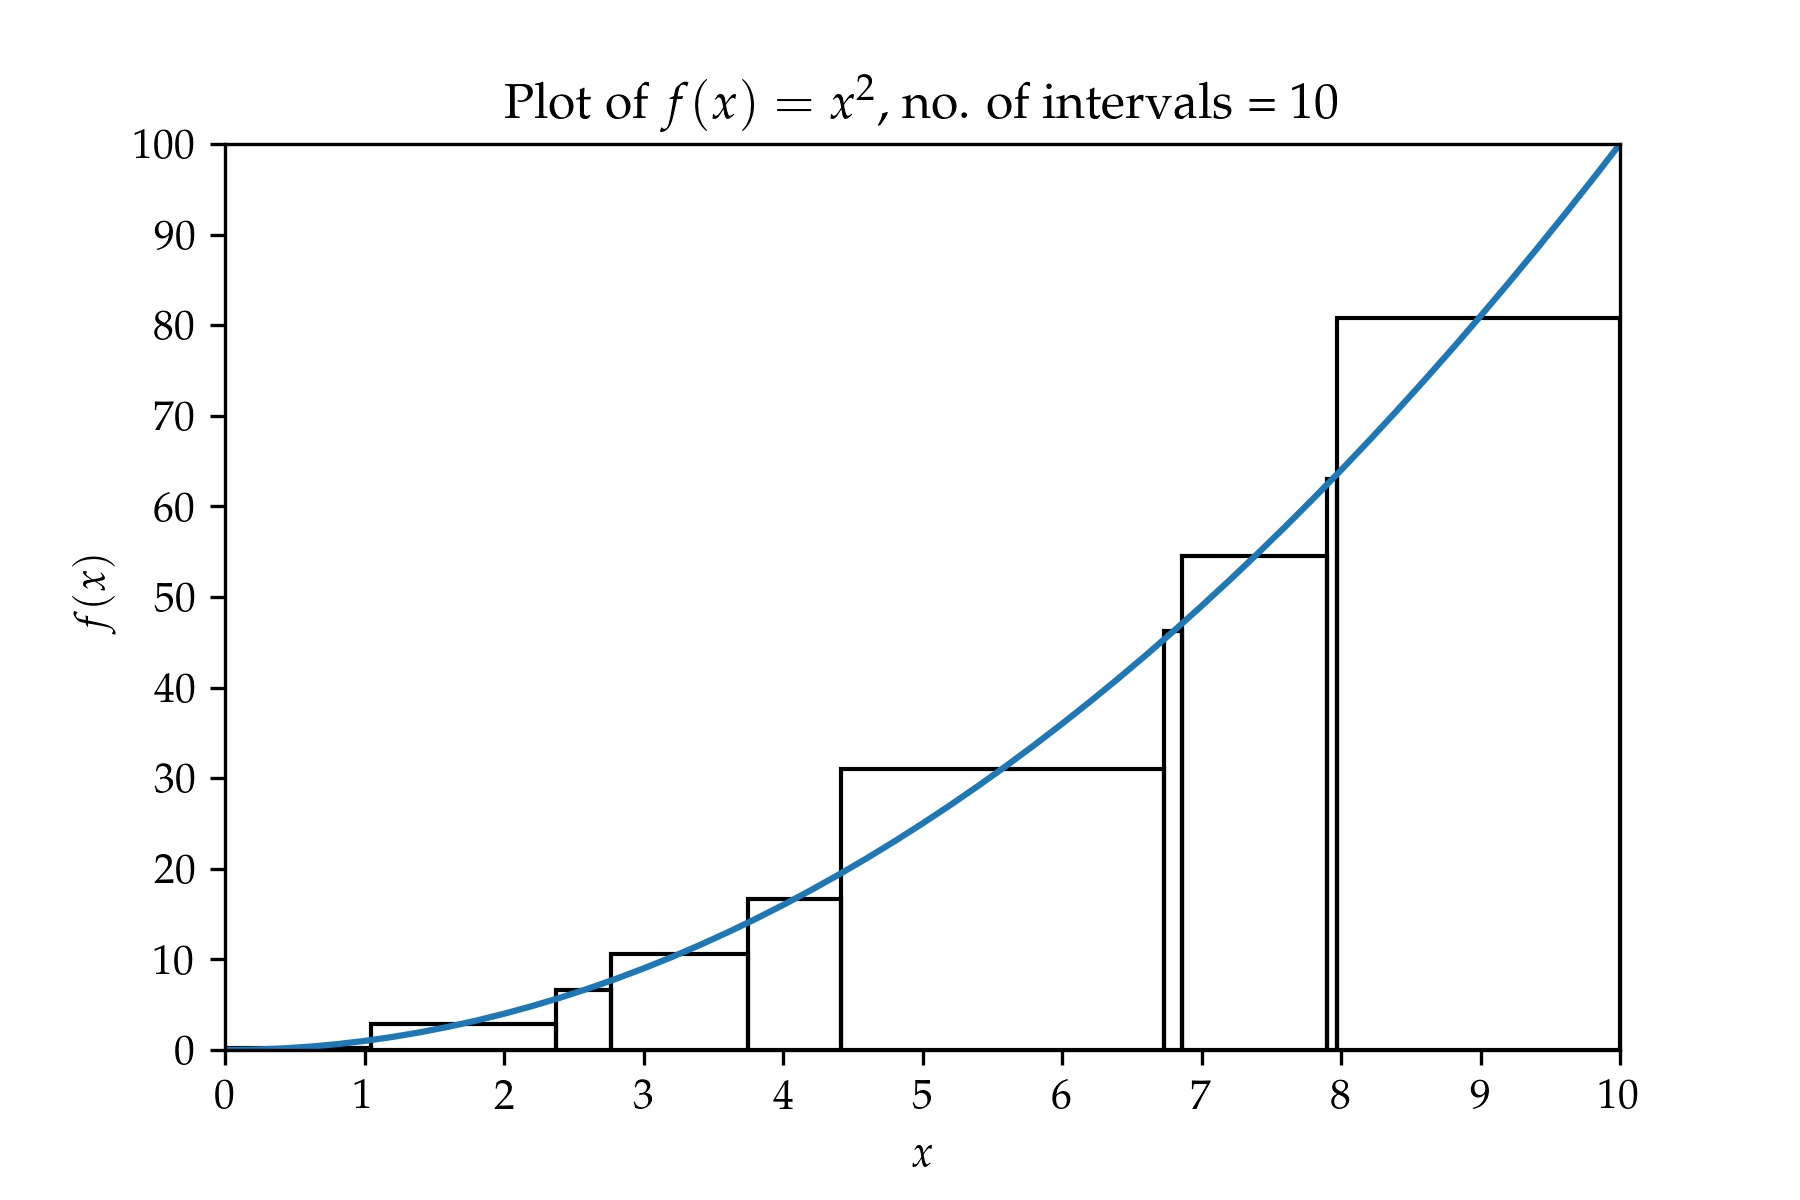 Plot of f(x) = x^2 with 15 samples